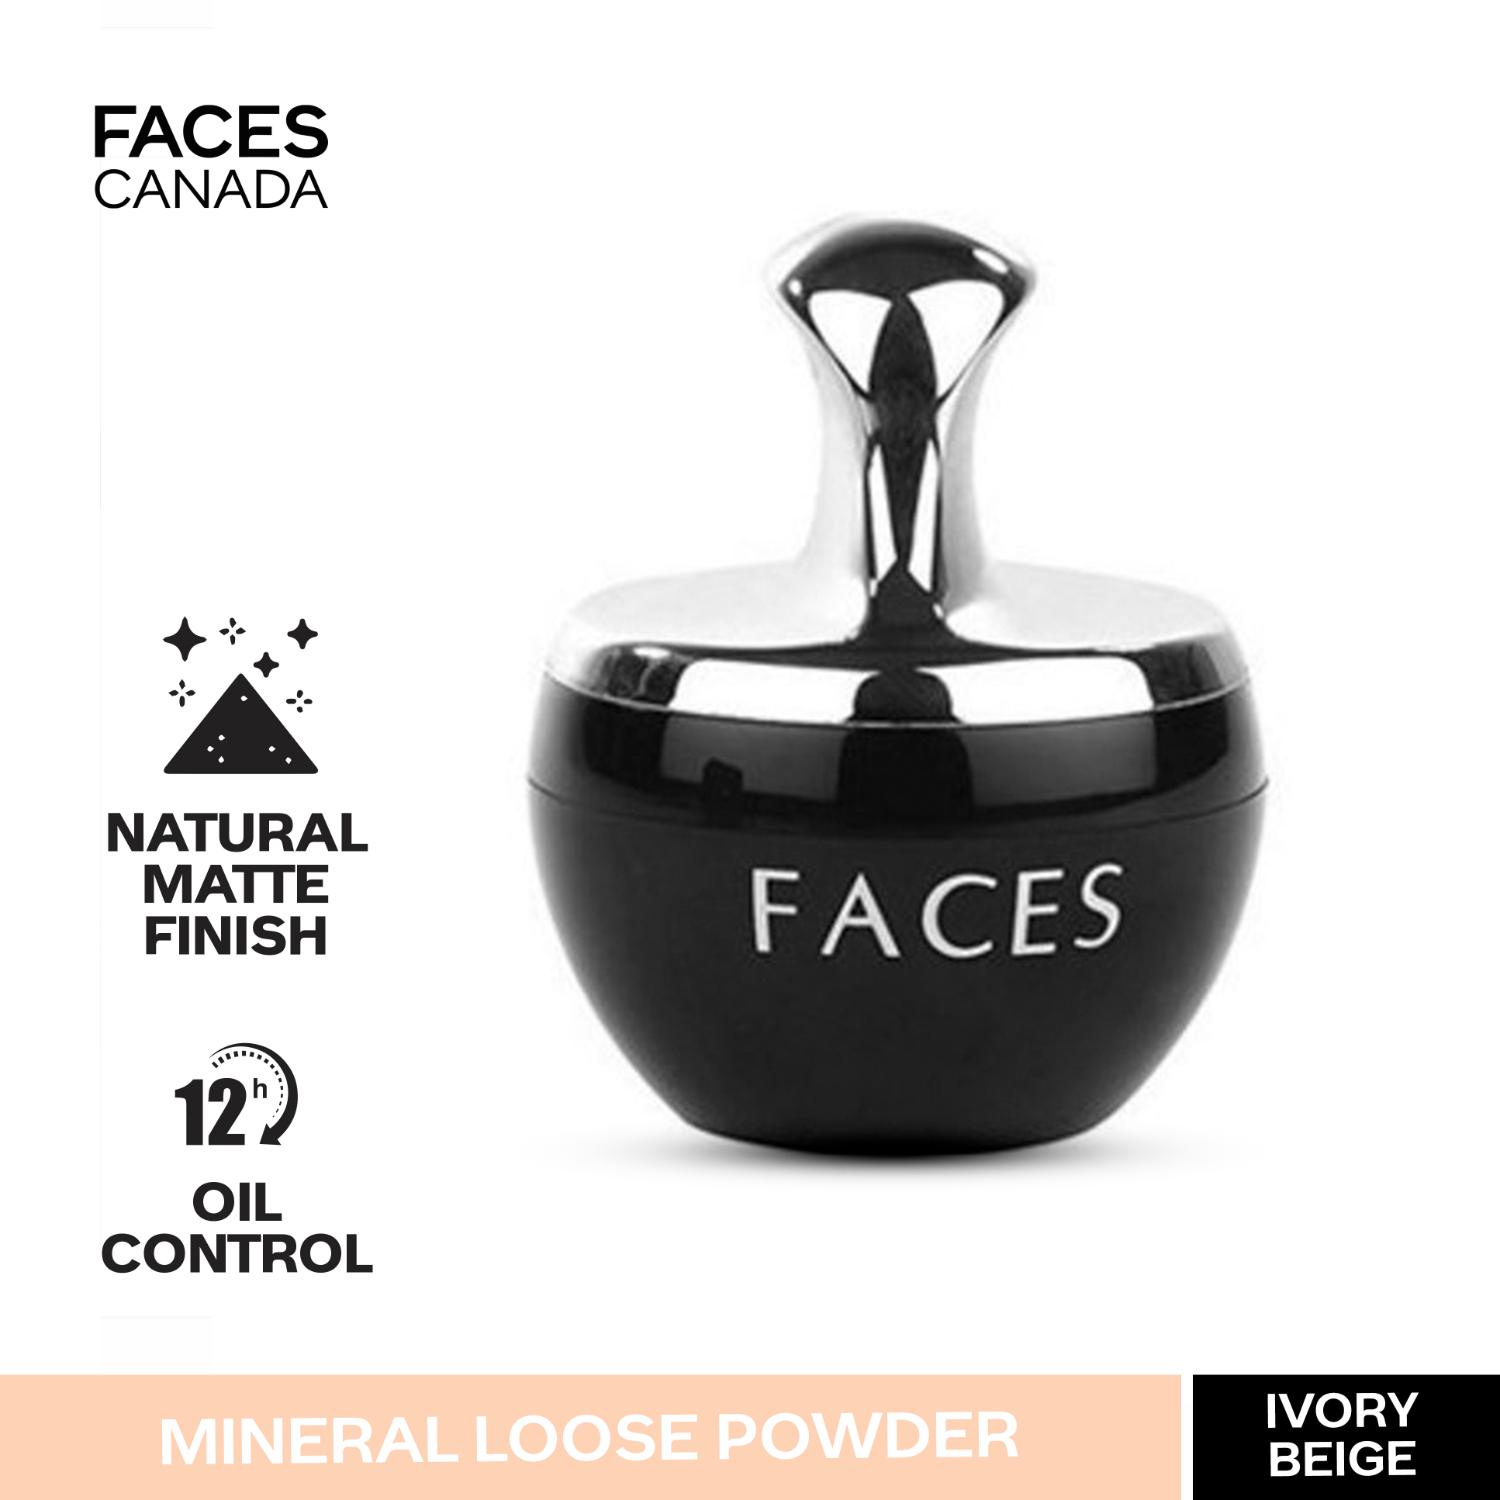 Faces Canada | Faces Canada Ultime Pro Mineral Loose Powder - Ivory Beige 02, Luminous Matte Setting Powder (7 g)